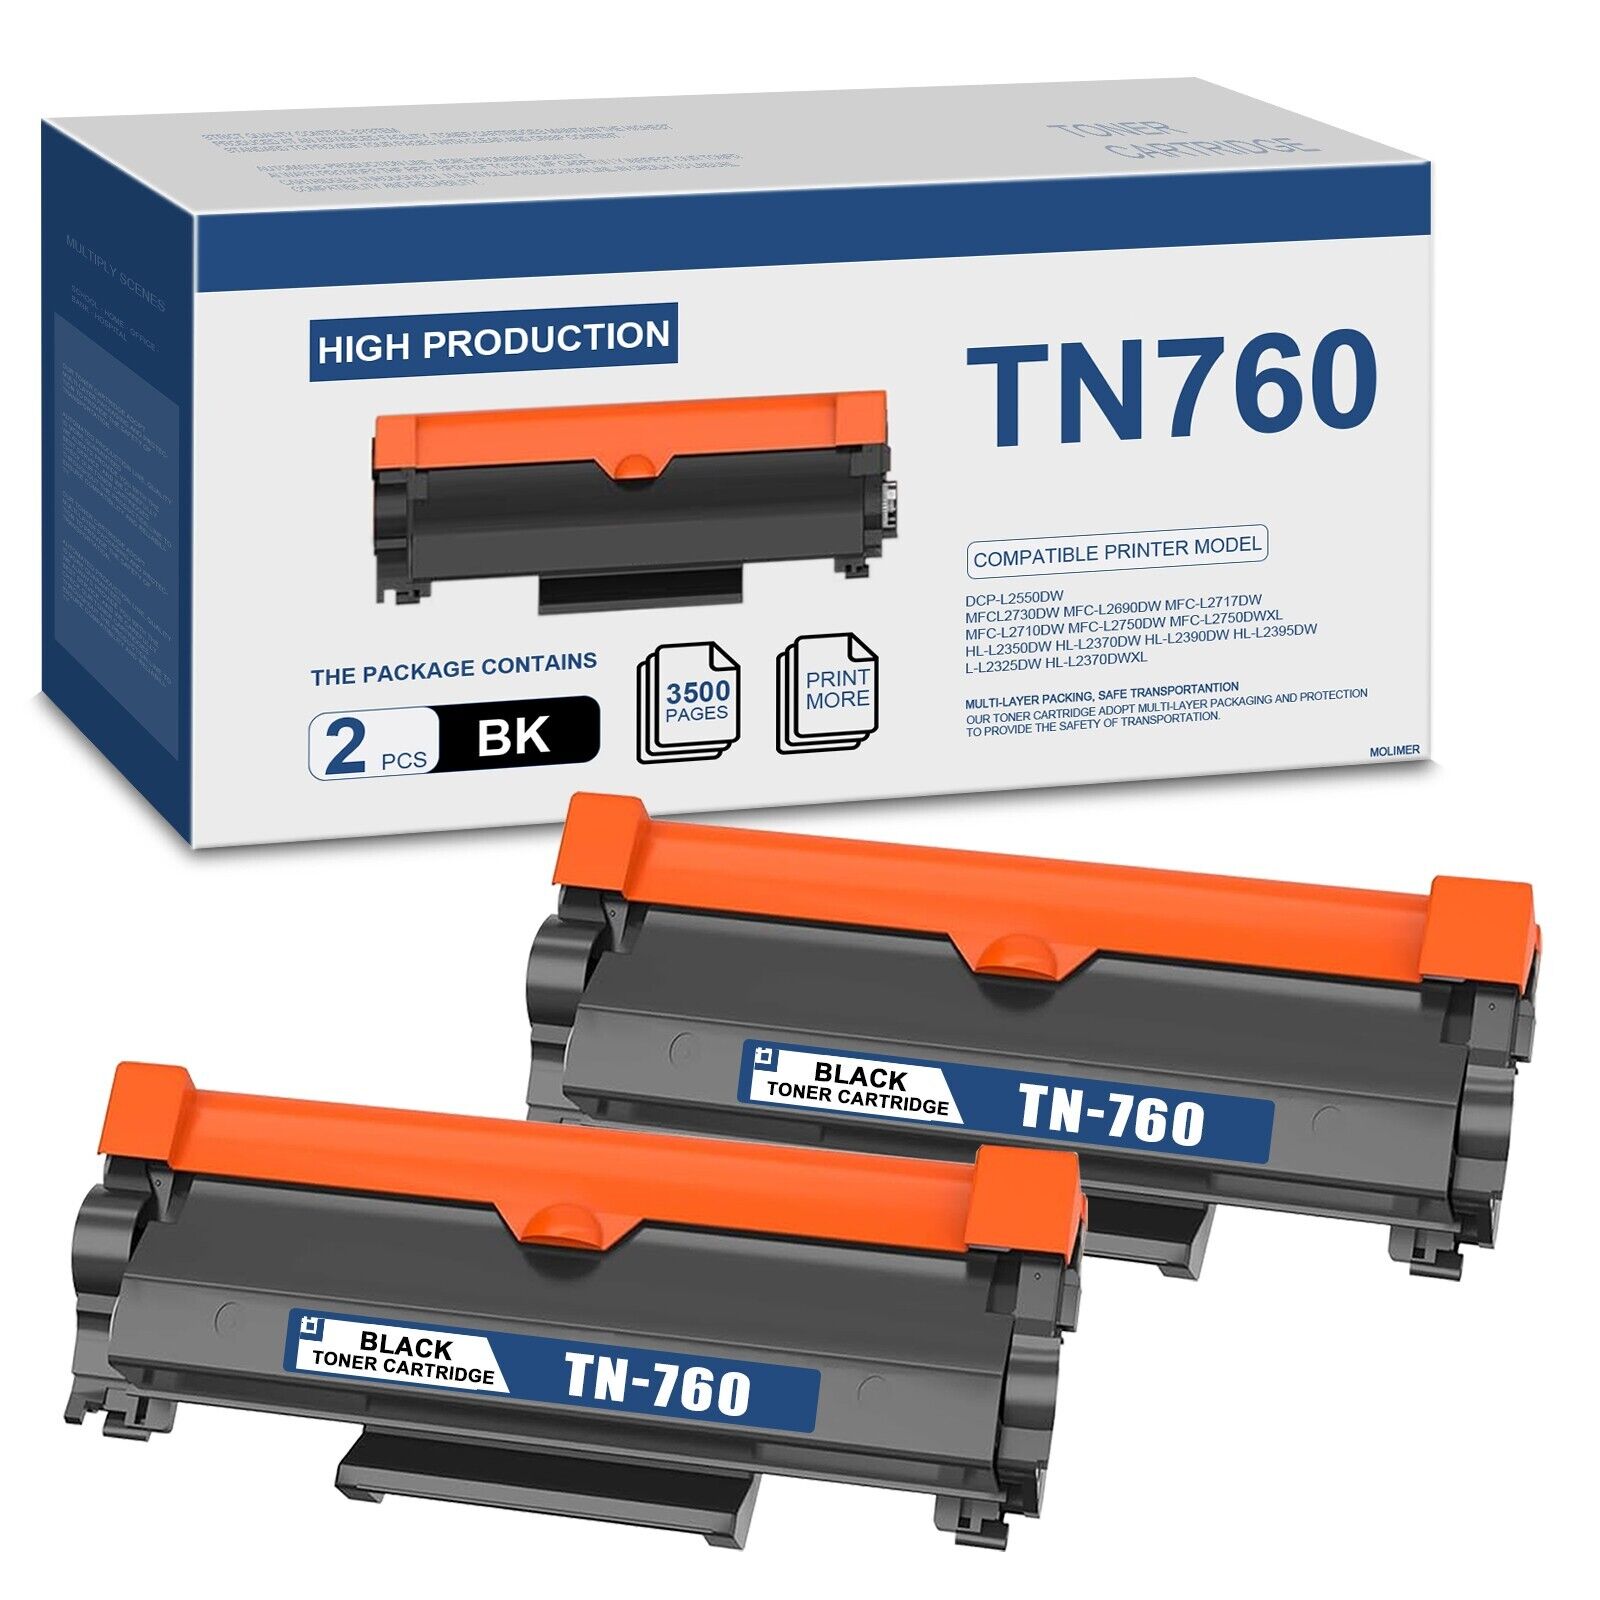 TN760 Black Toner Cartridge Replacement for Brother TN760 MFC-L2710DW Printer